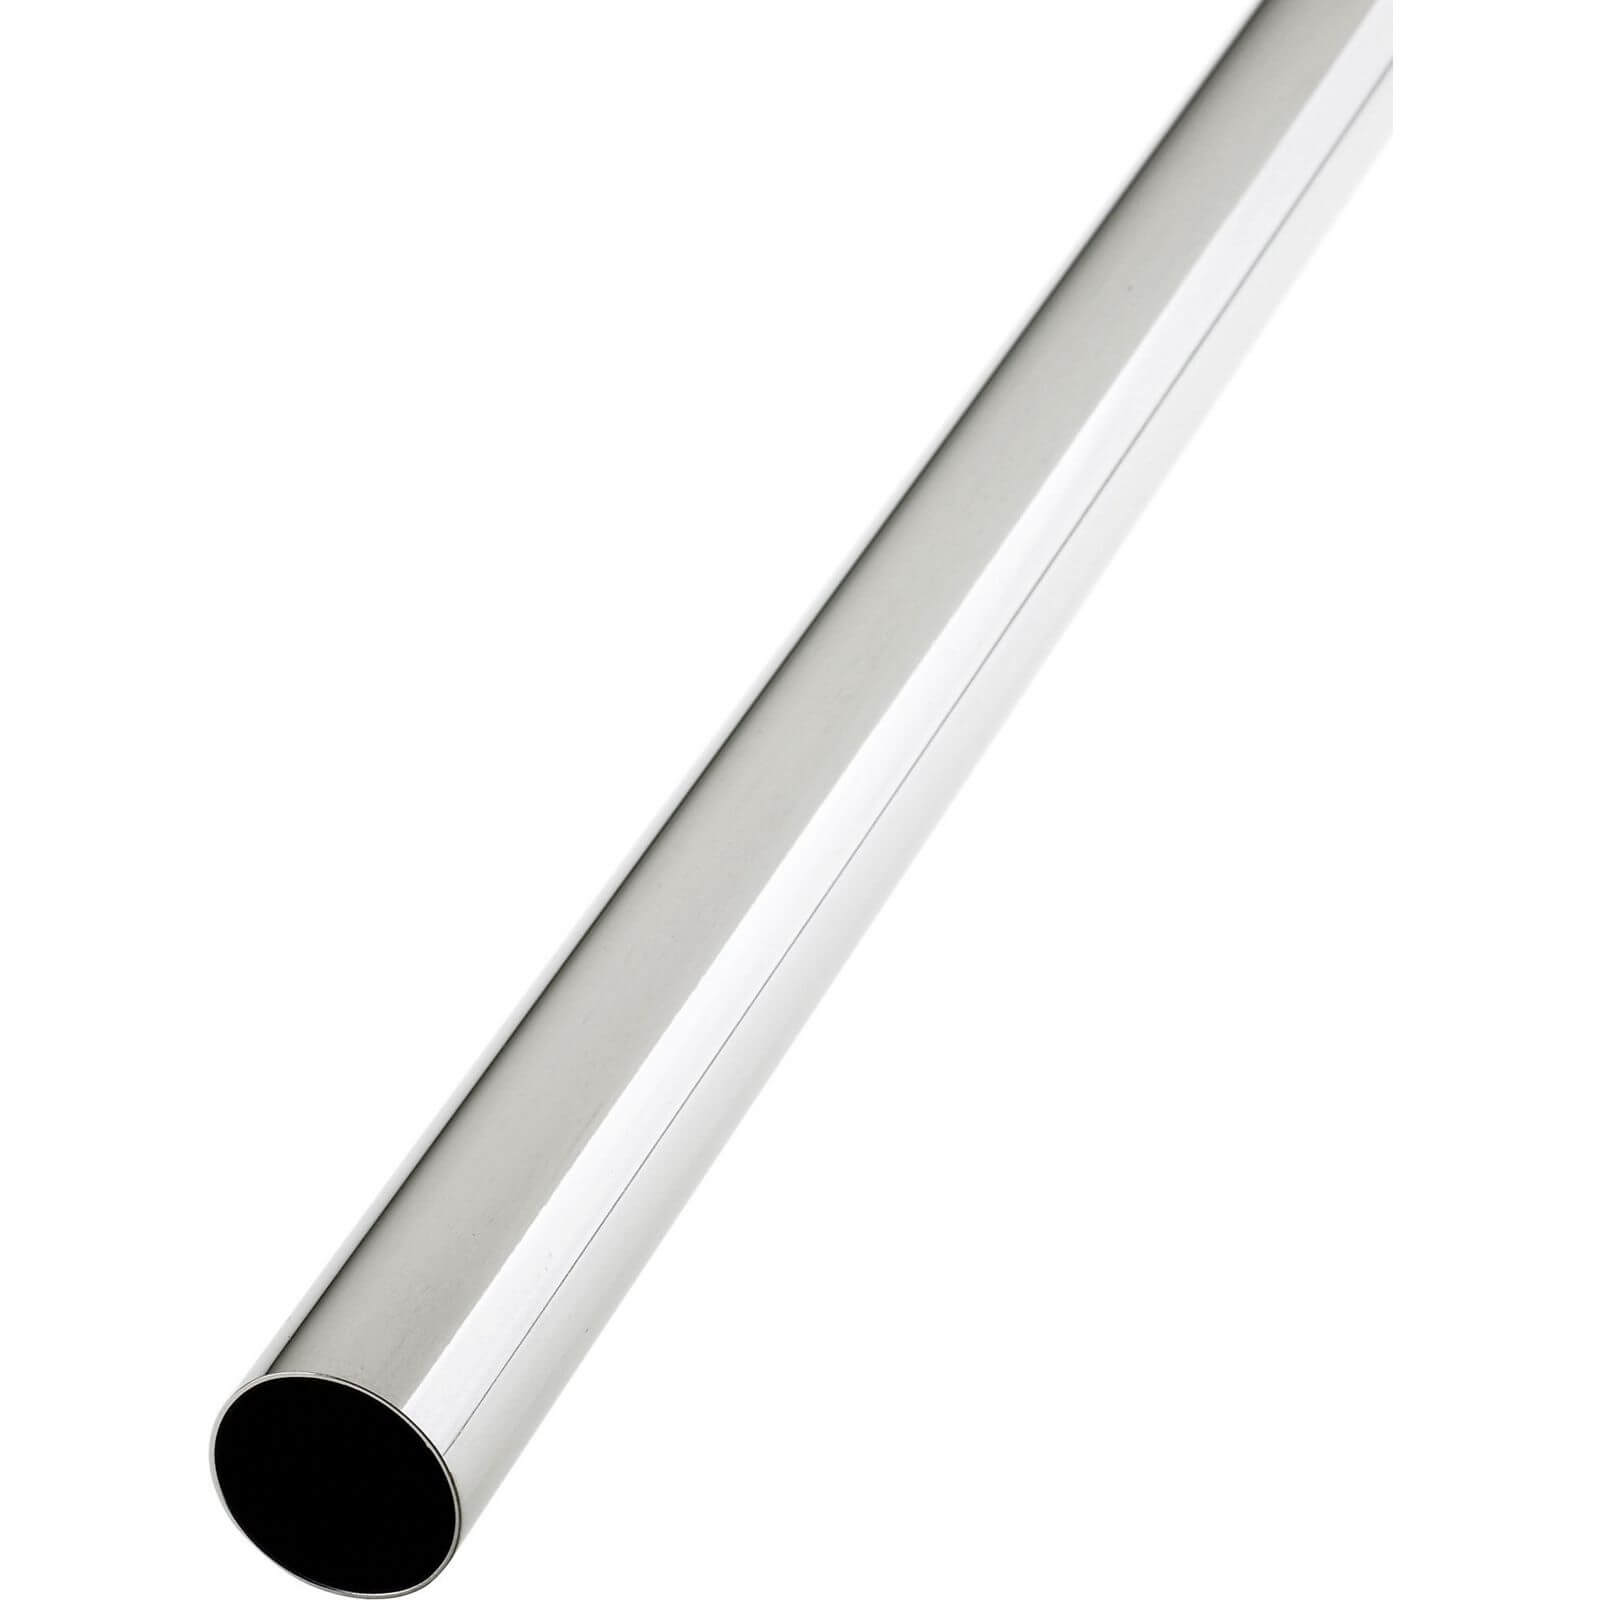 Photo of Rothley Steel Tube - Chrome Plated - 32mm X 2.44m